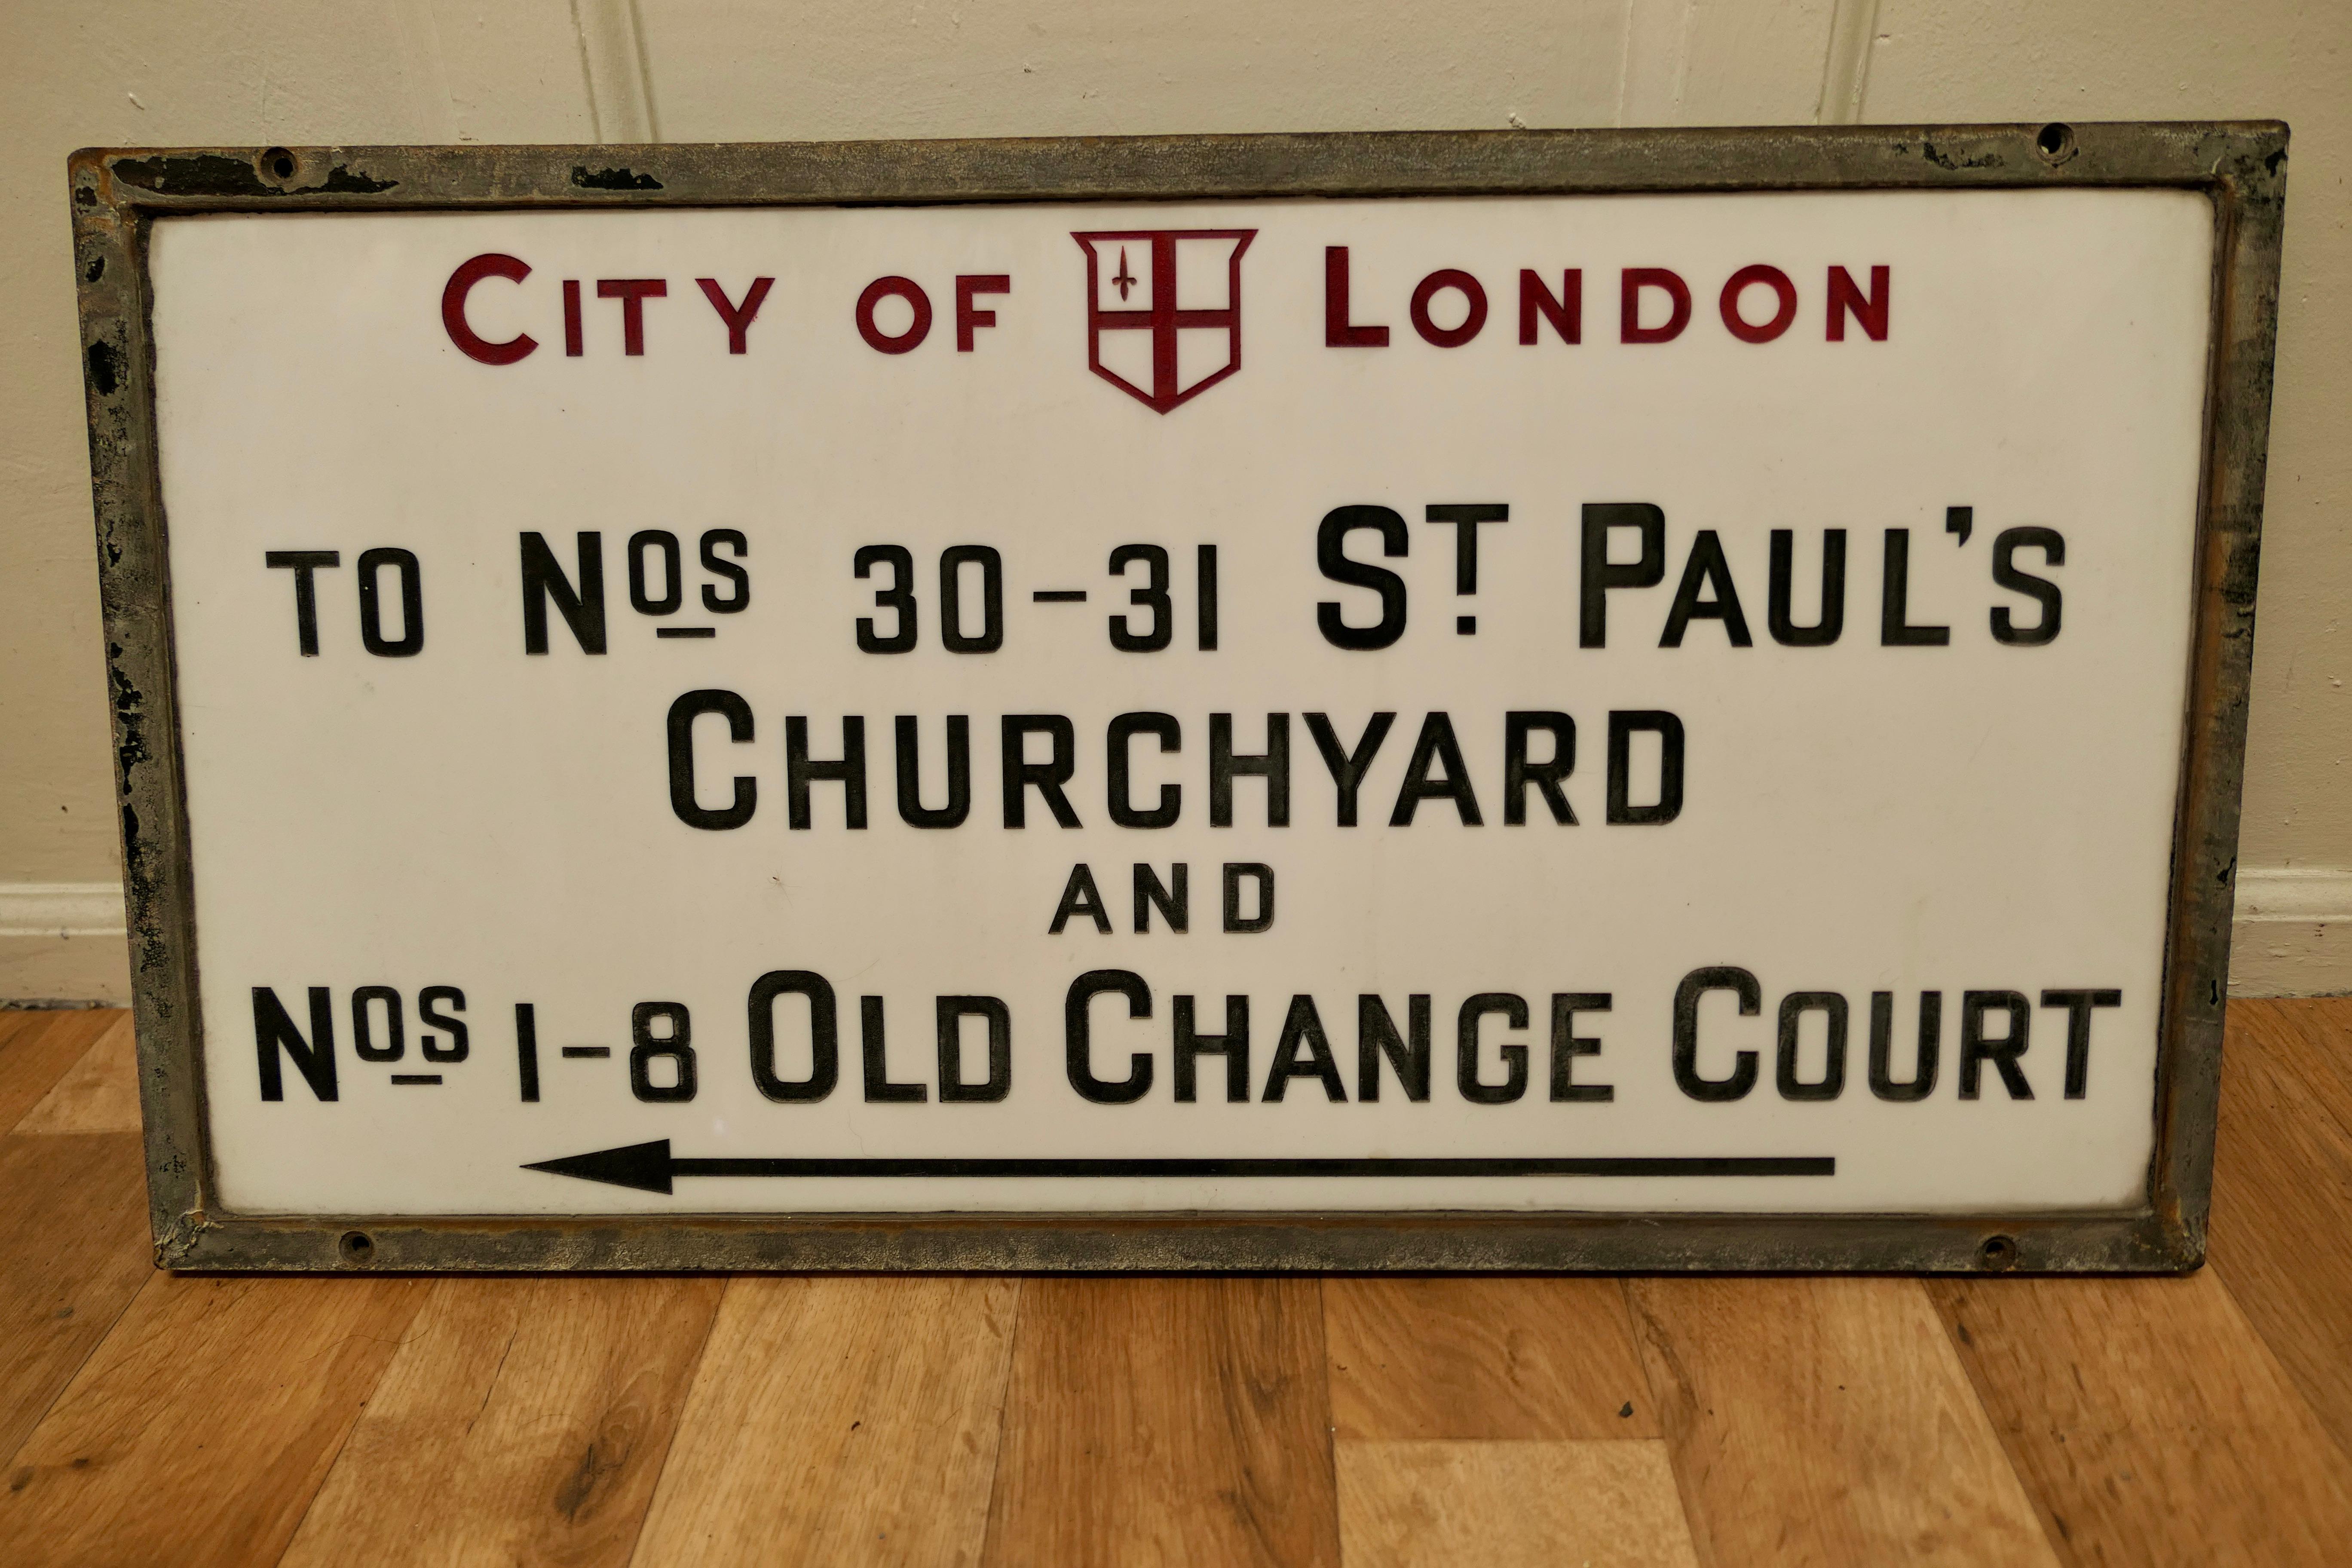 St Paul’s Churchyard, City of London glass Edwardian Street Sign

This is a City of London Street sign, it is set in its Cast Iron Frame, it is made in etched Vitrolite Glass, the City Of London impressed in red and the other characters are